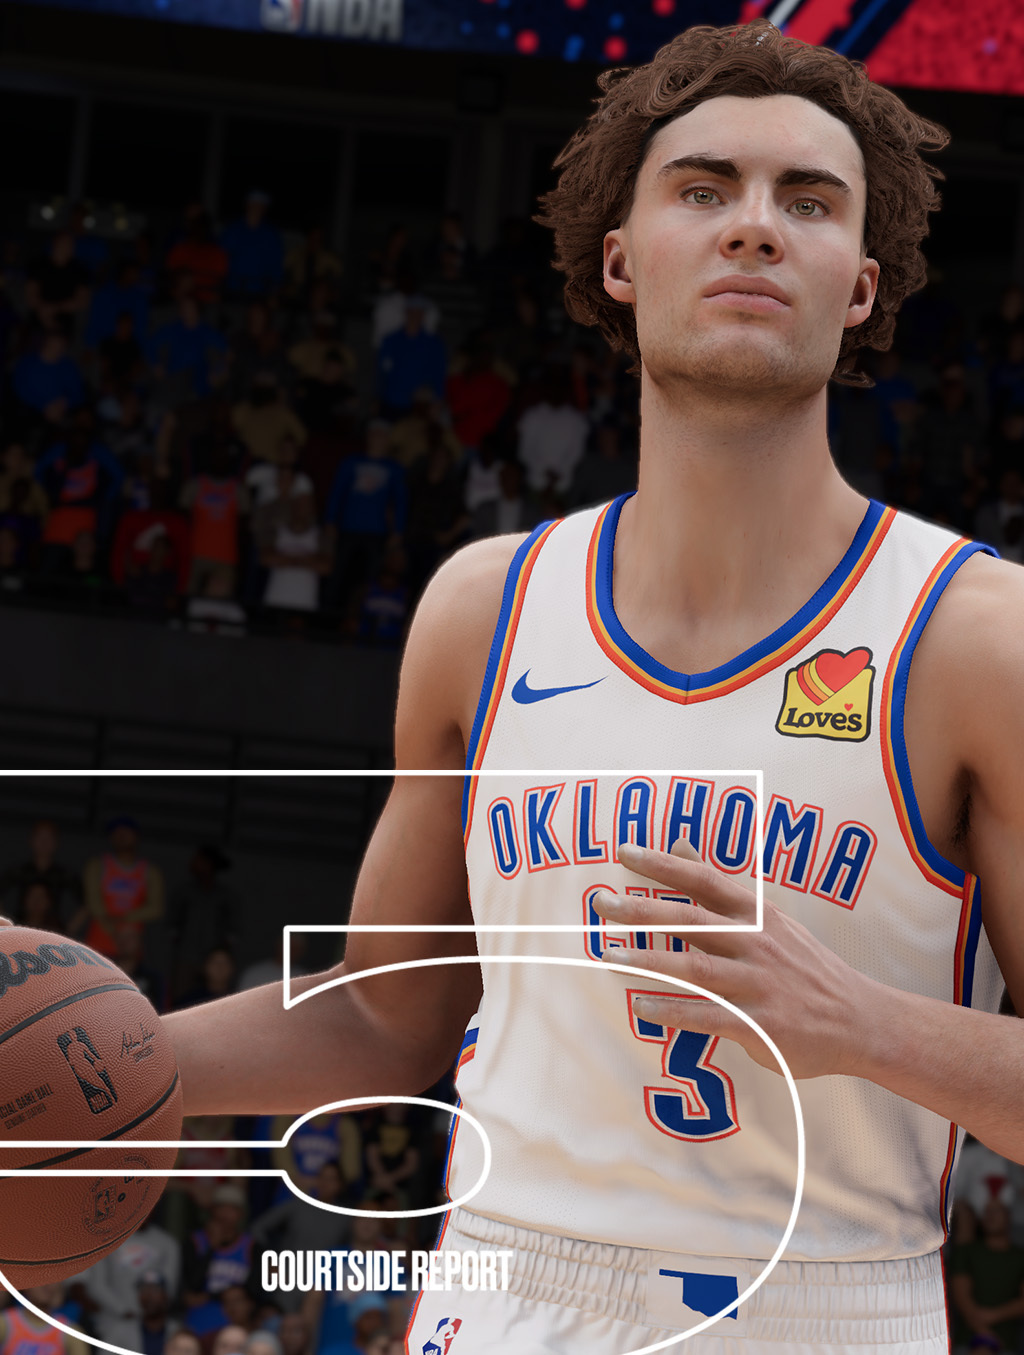 I didnt realize Zach Levine wore a default brown shirt lol, for real tho  where's my jersey 2k? : r/NBA2k